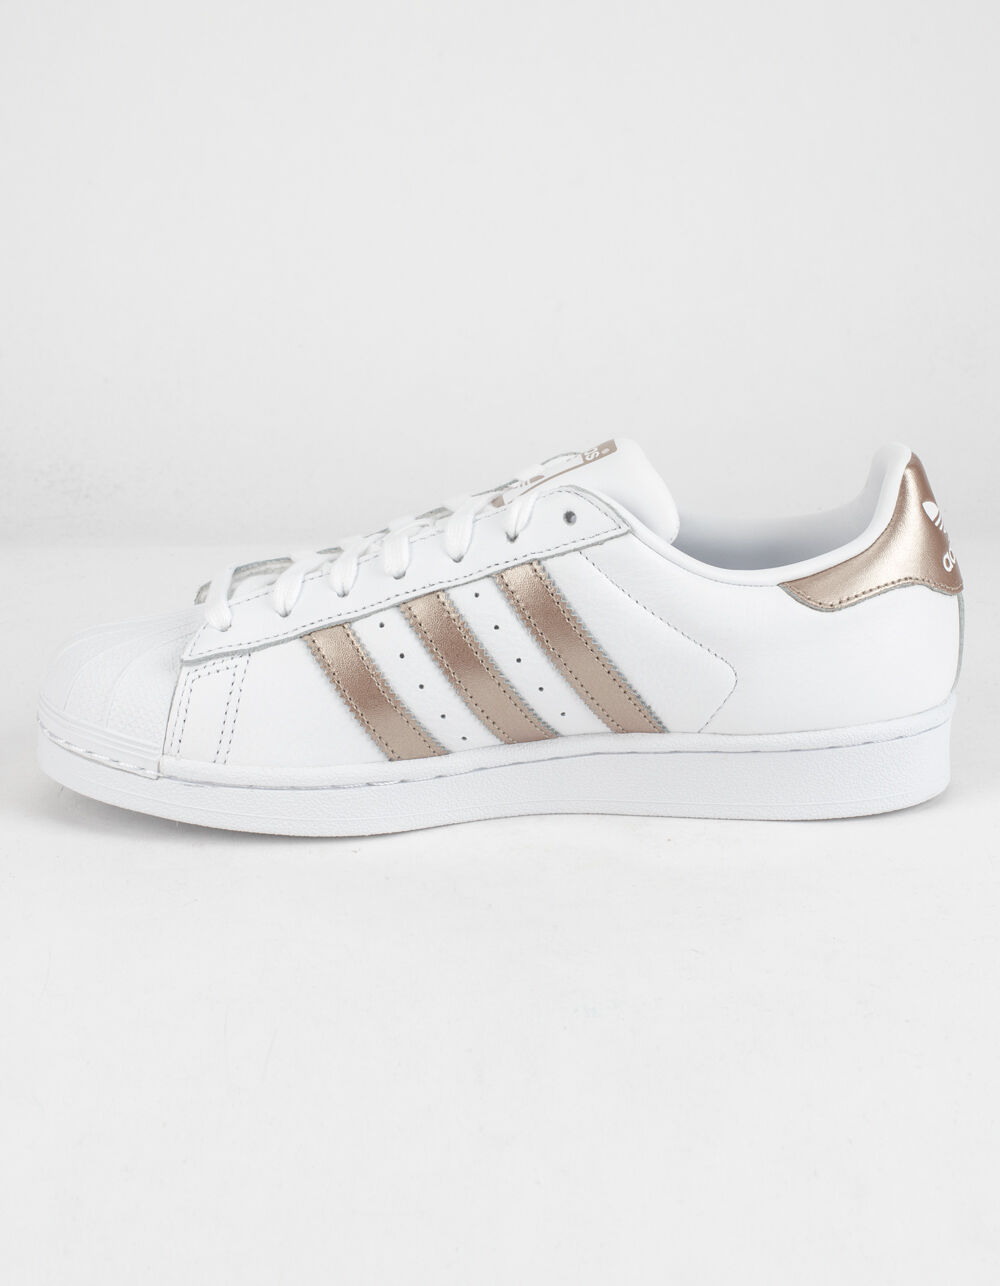 ADIDAS Superstar Womens Shoes - WHITE/GOLD | Tillys